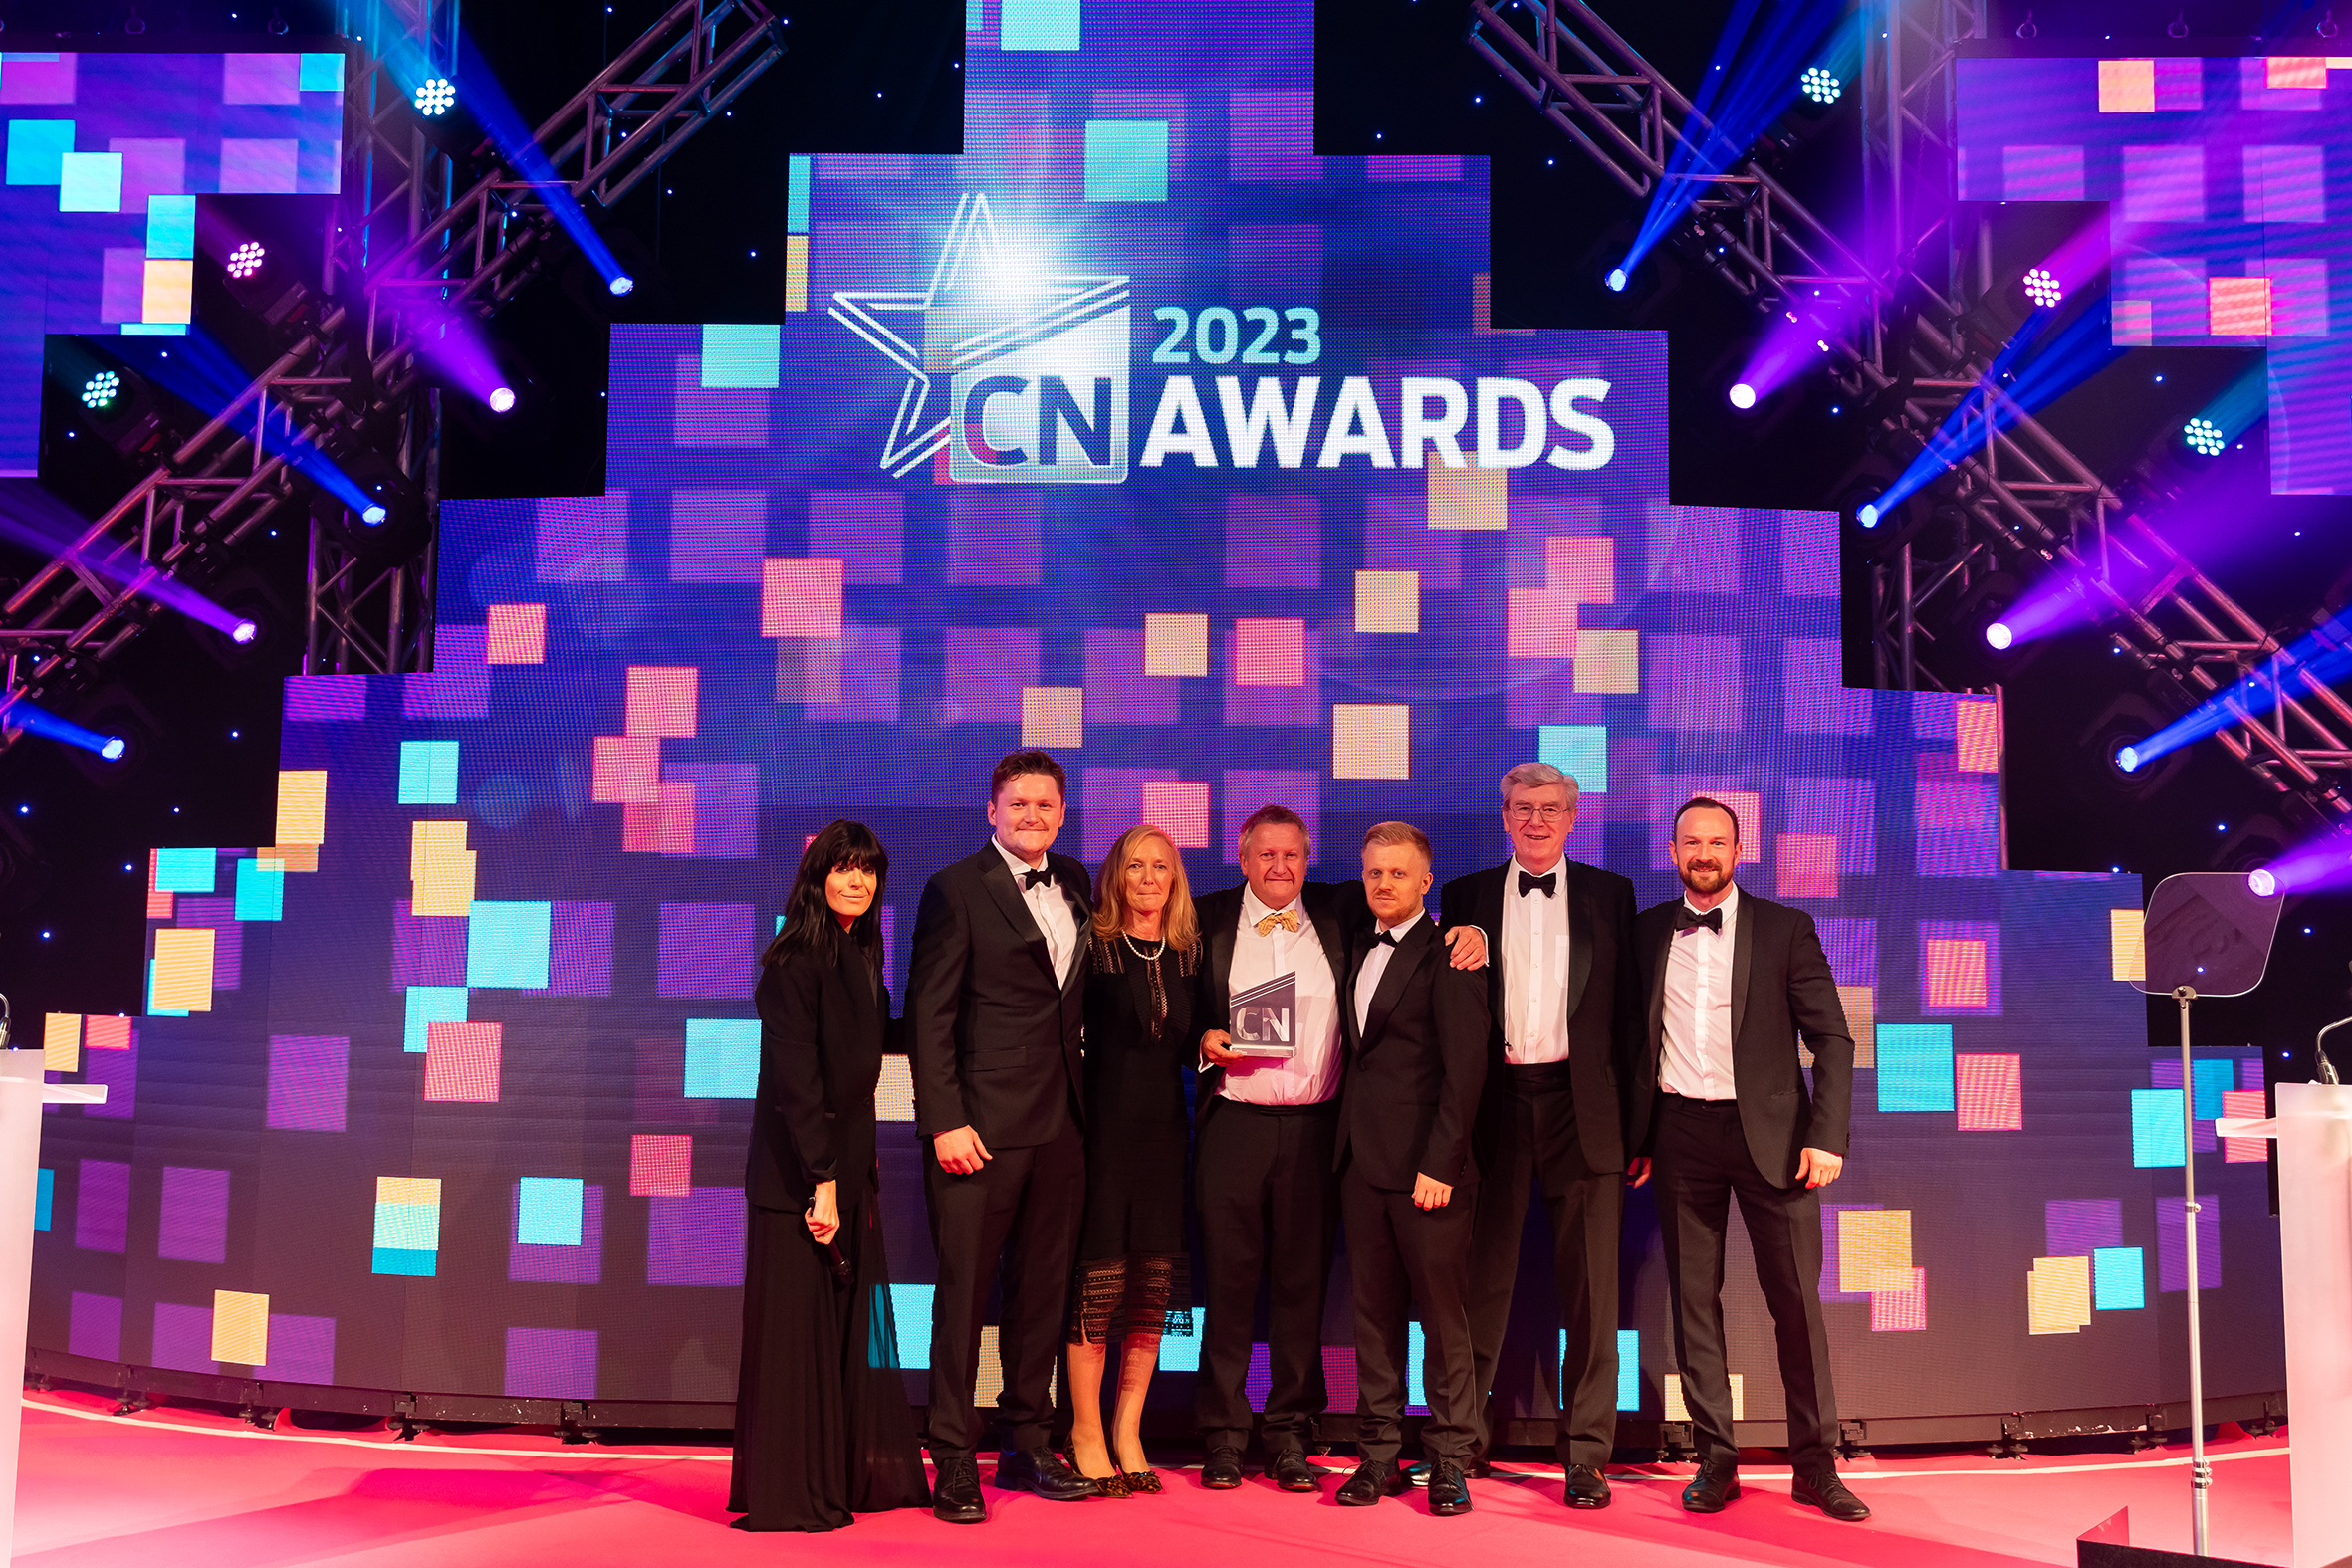 Jonathan Forbes-Brown and Joshua Forbes-Brown from Imperial Thermal Engineering receiving their award at the 2023 Construction News Awards ceremony